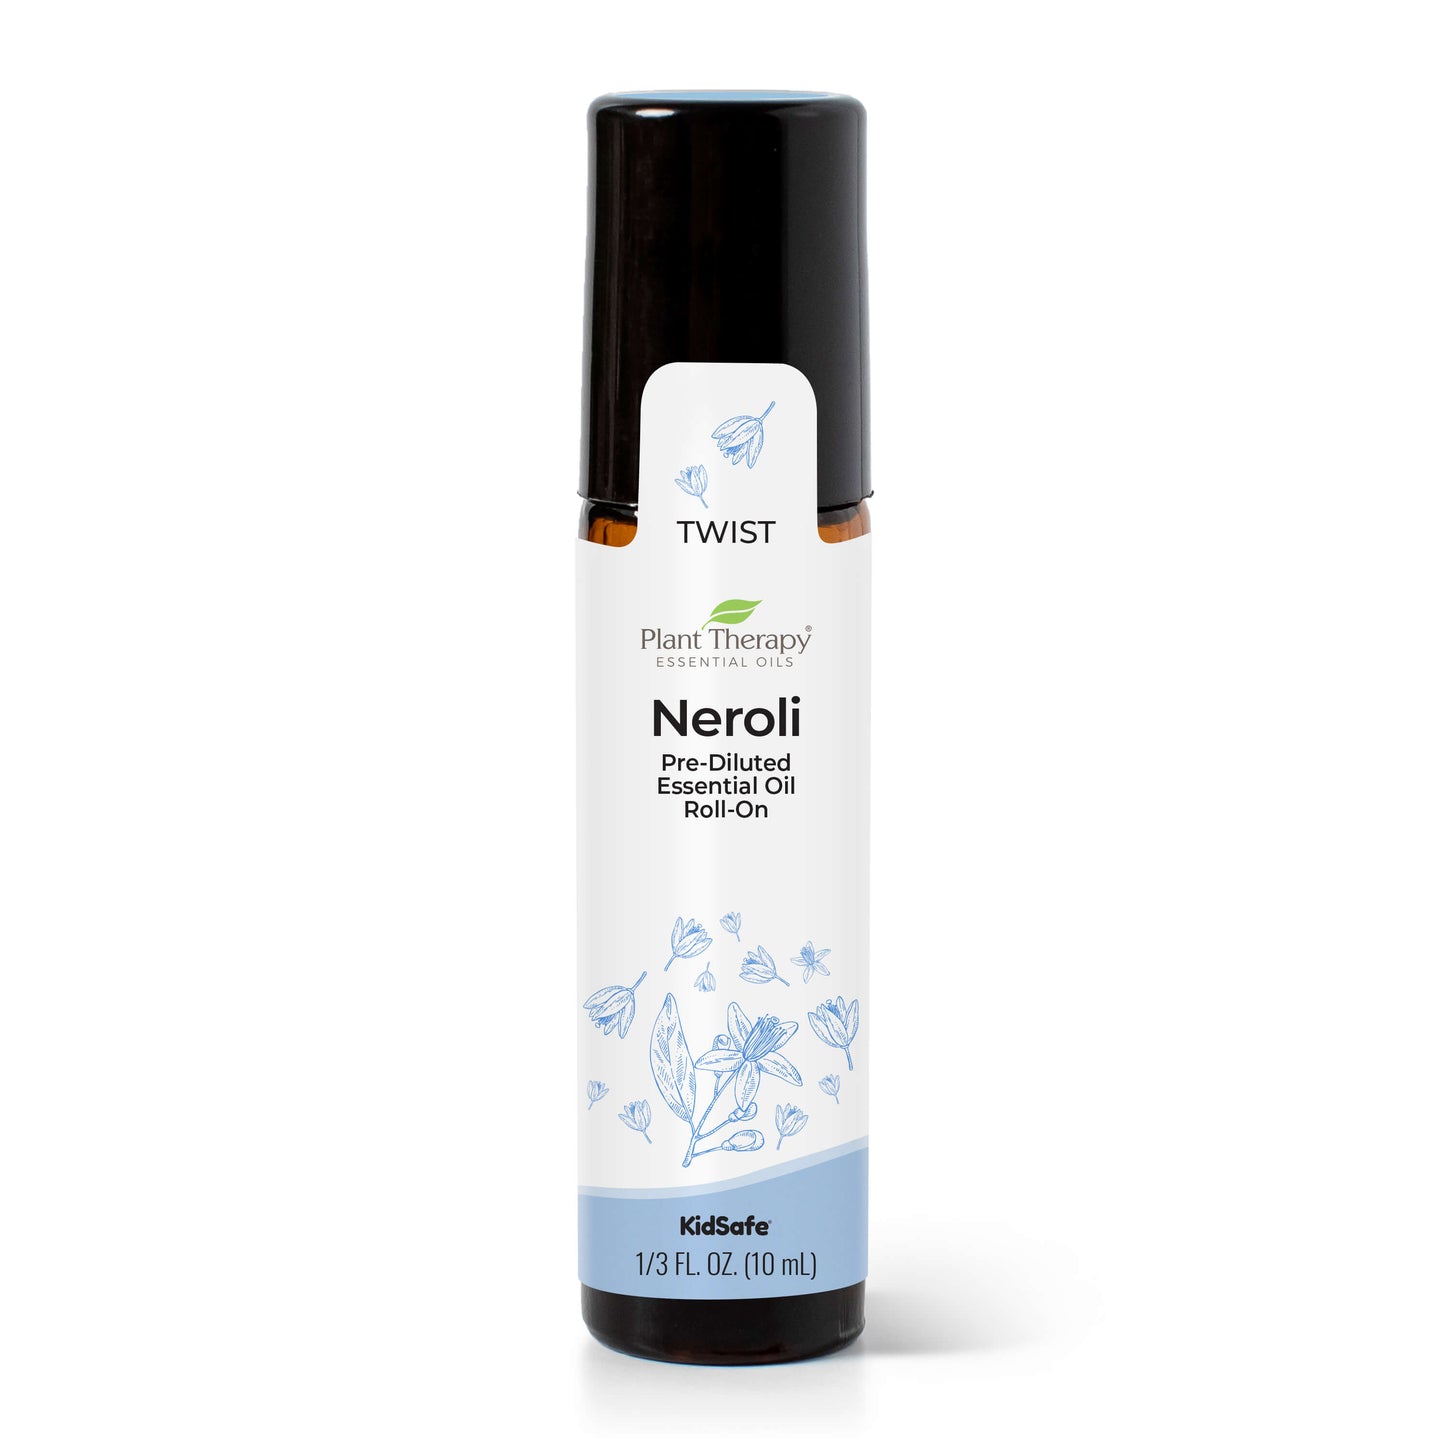 Neroli Essential Oil Pre-Diluted Roll-On